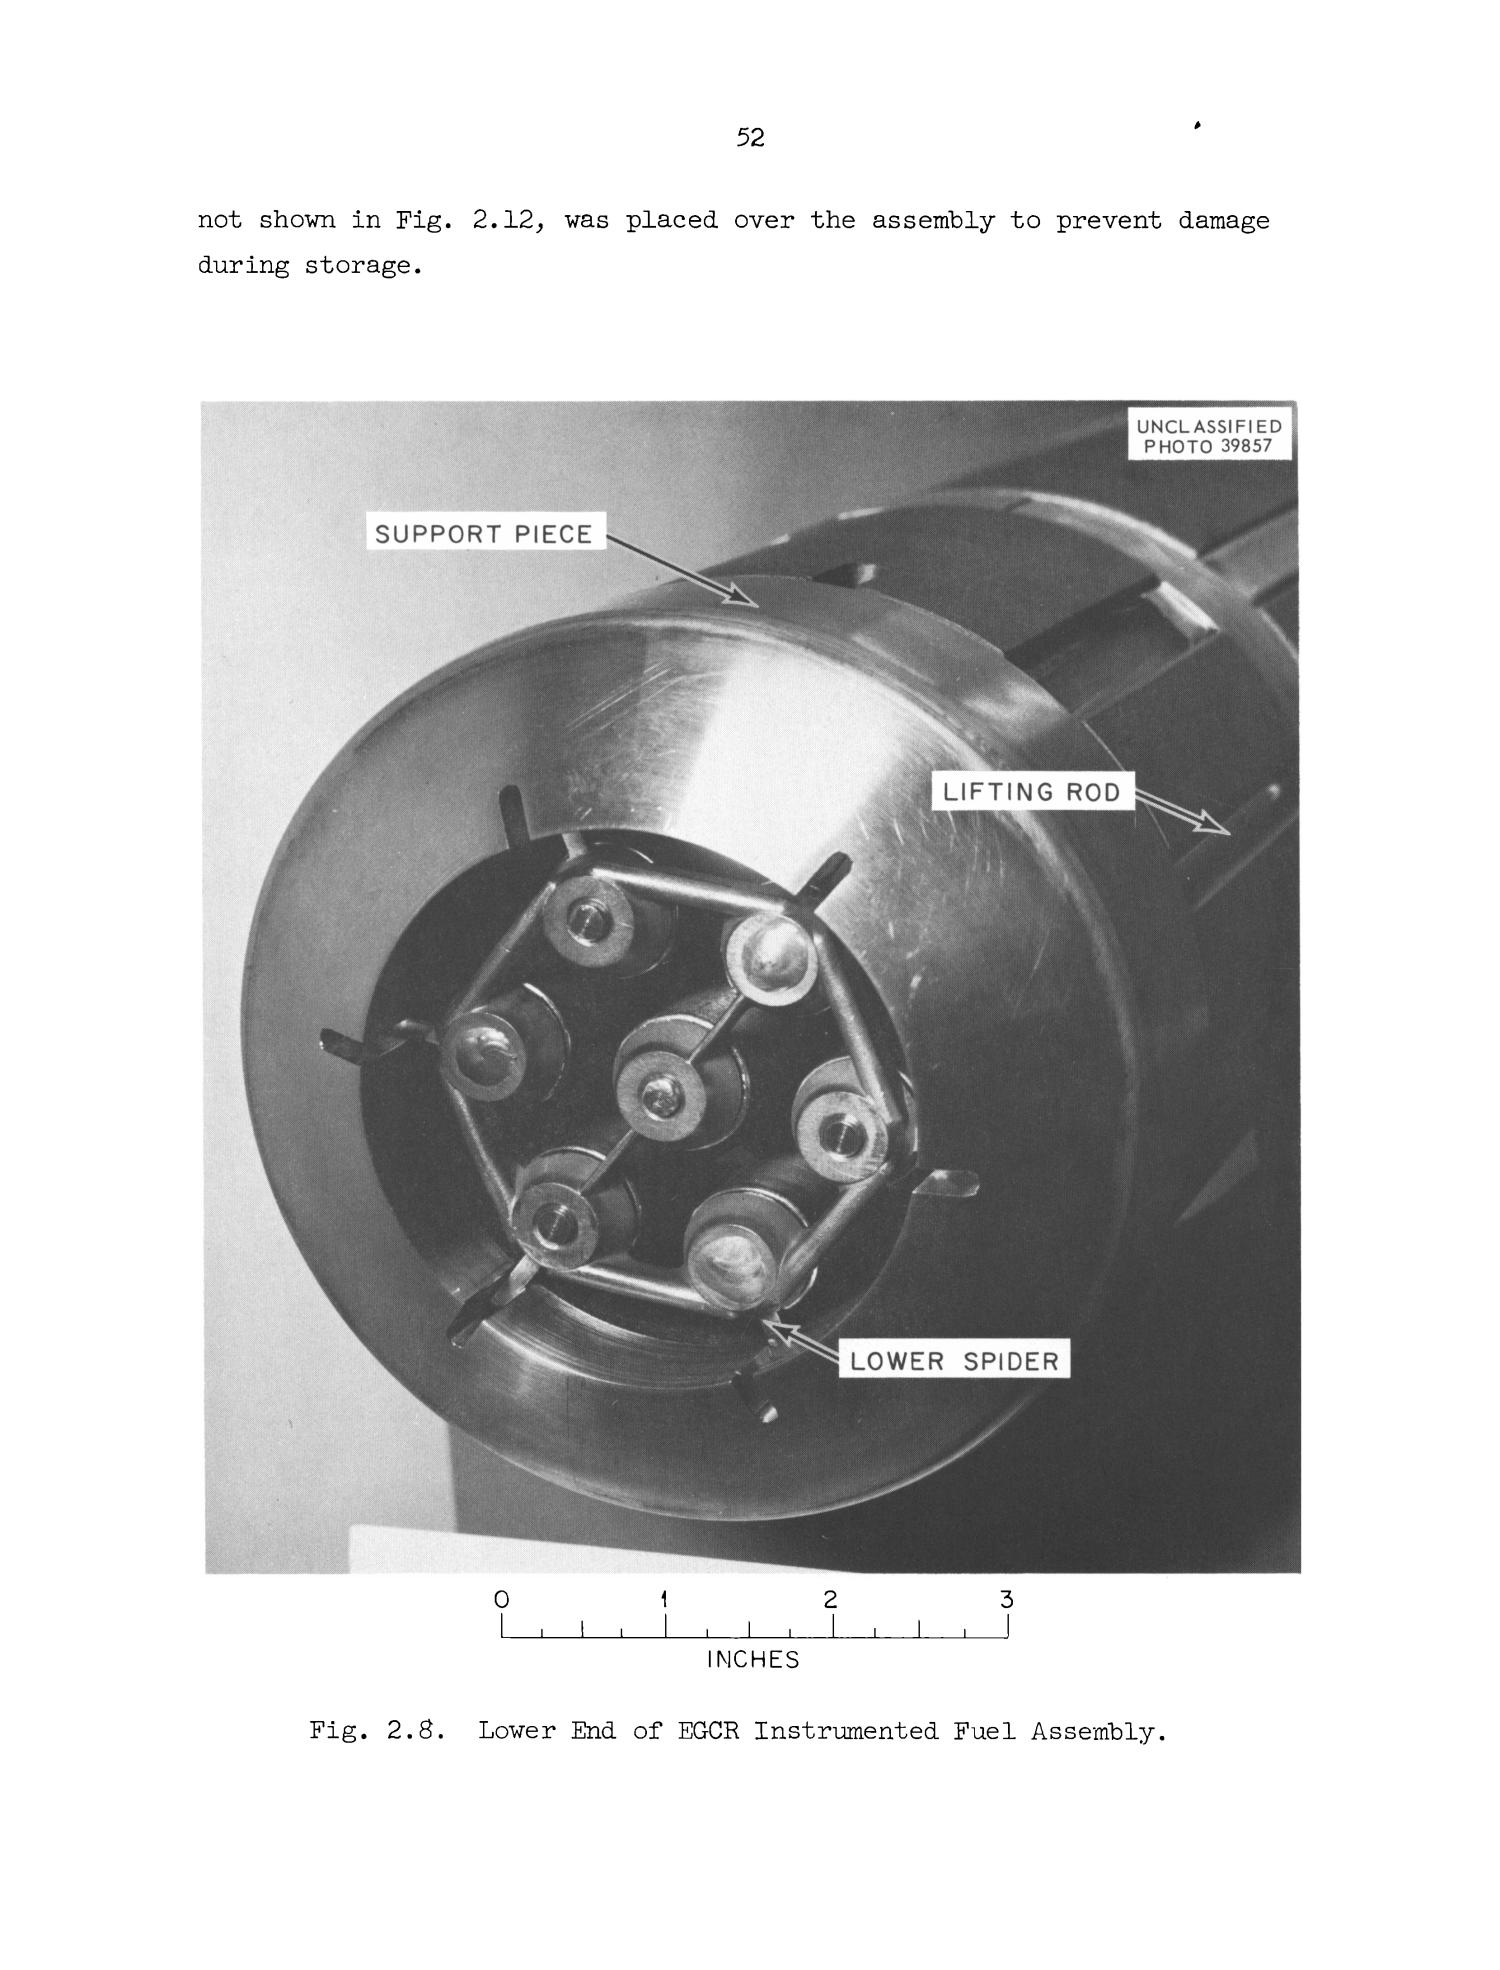 Gas-Cooled Reactor Project Semiannual Progress Report: September 1963
                                                
                                                    52
                                                